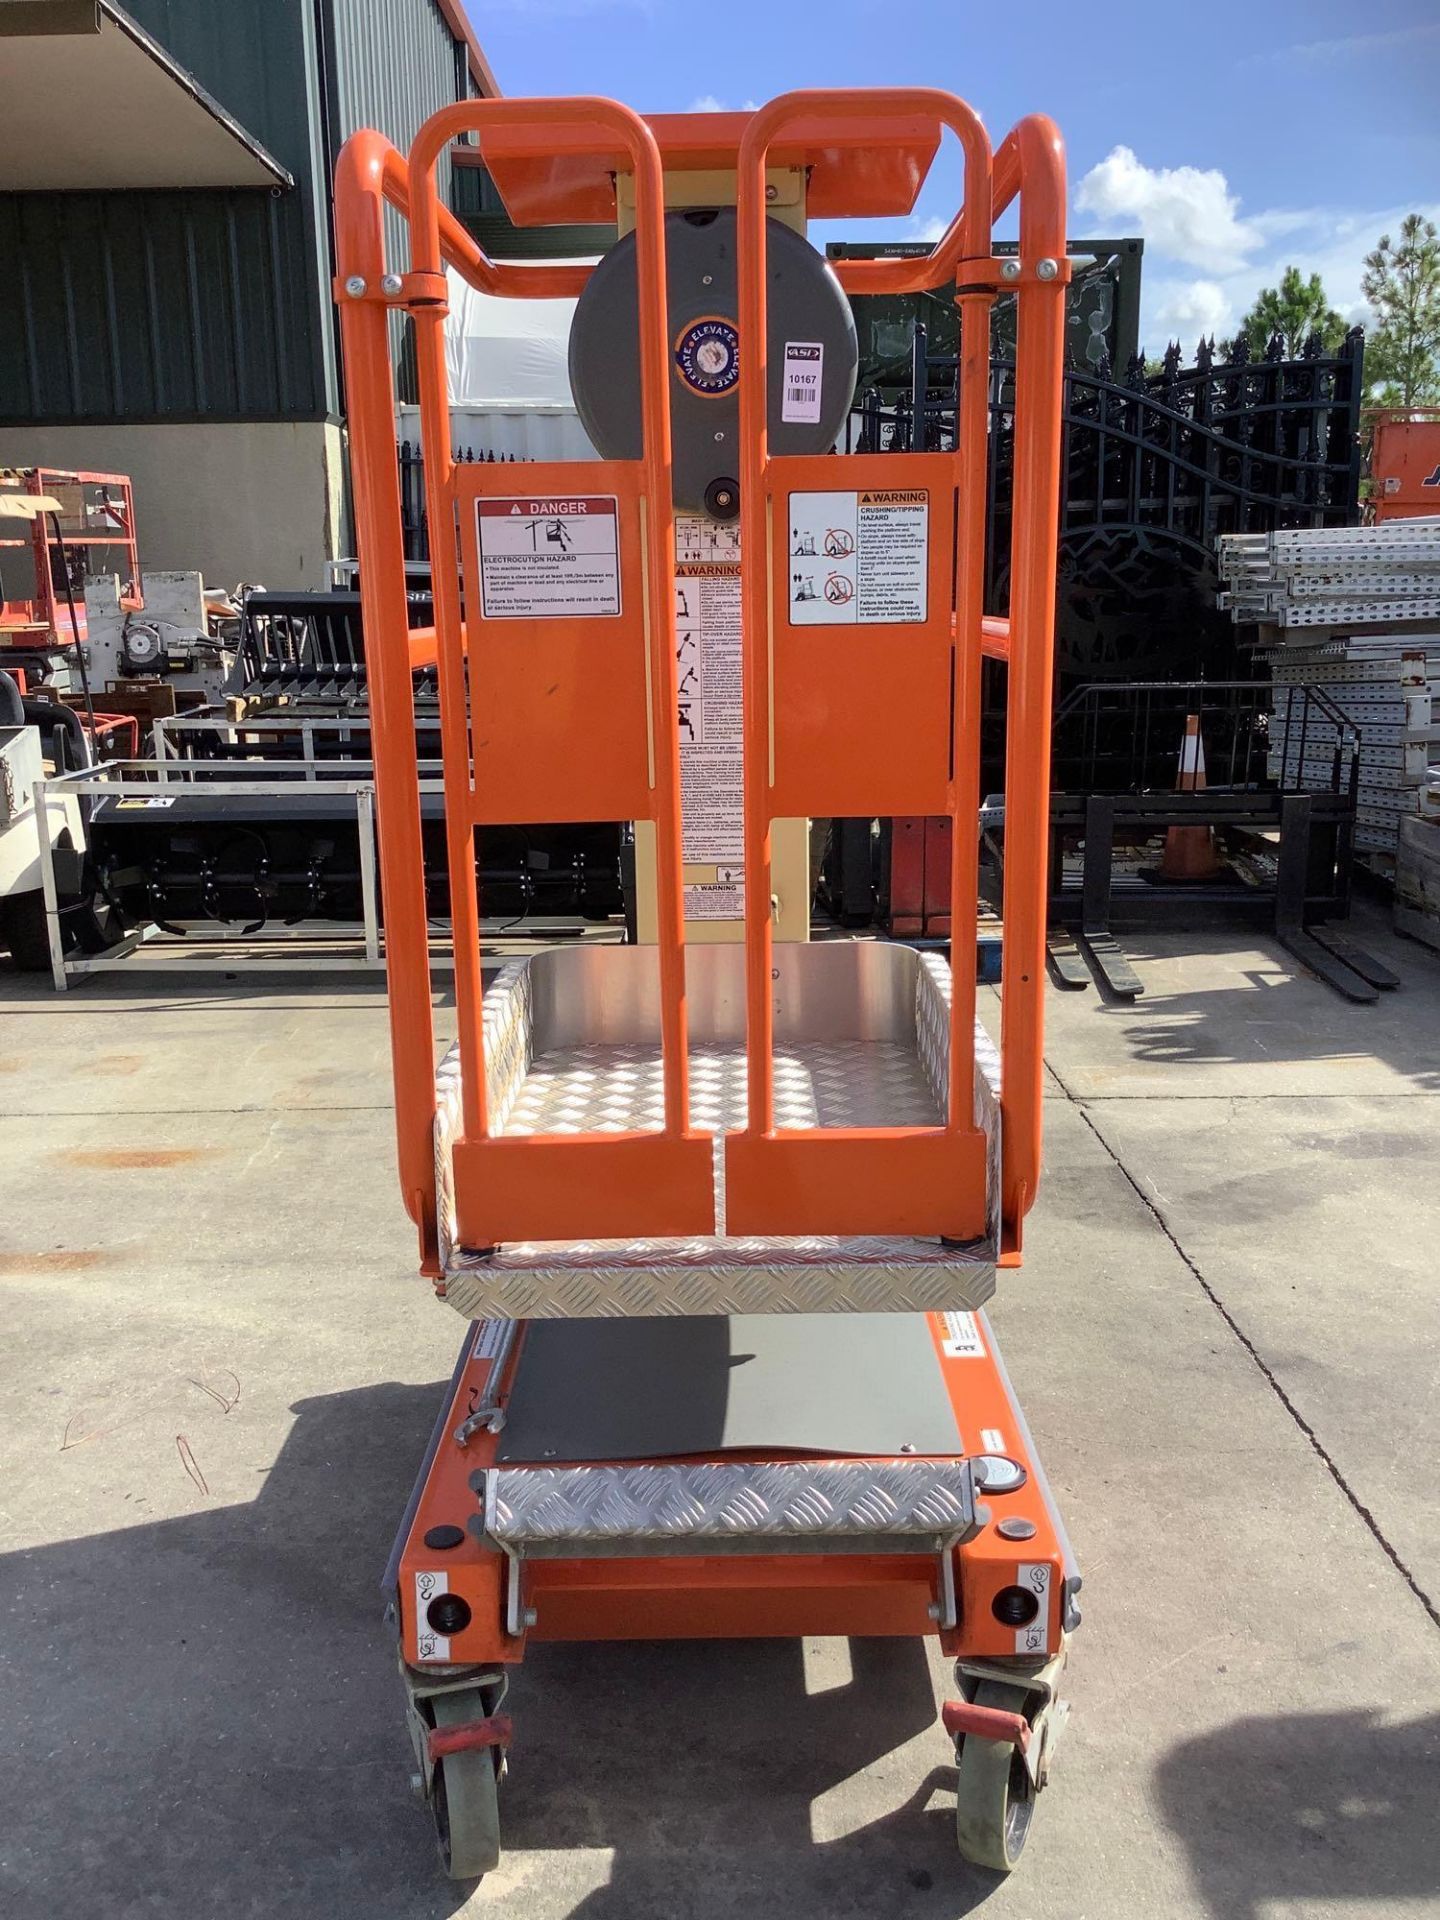 2018 JLG ECOLIFT 70,MANUAL, APPROX MAX PLATFORM HEIGHT 7FT, NON MARKING TIRES - Image 8 of 10